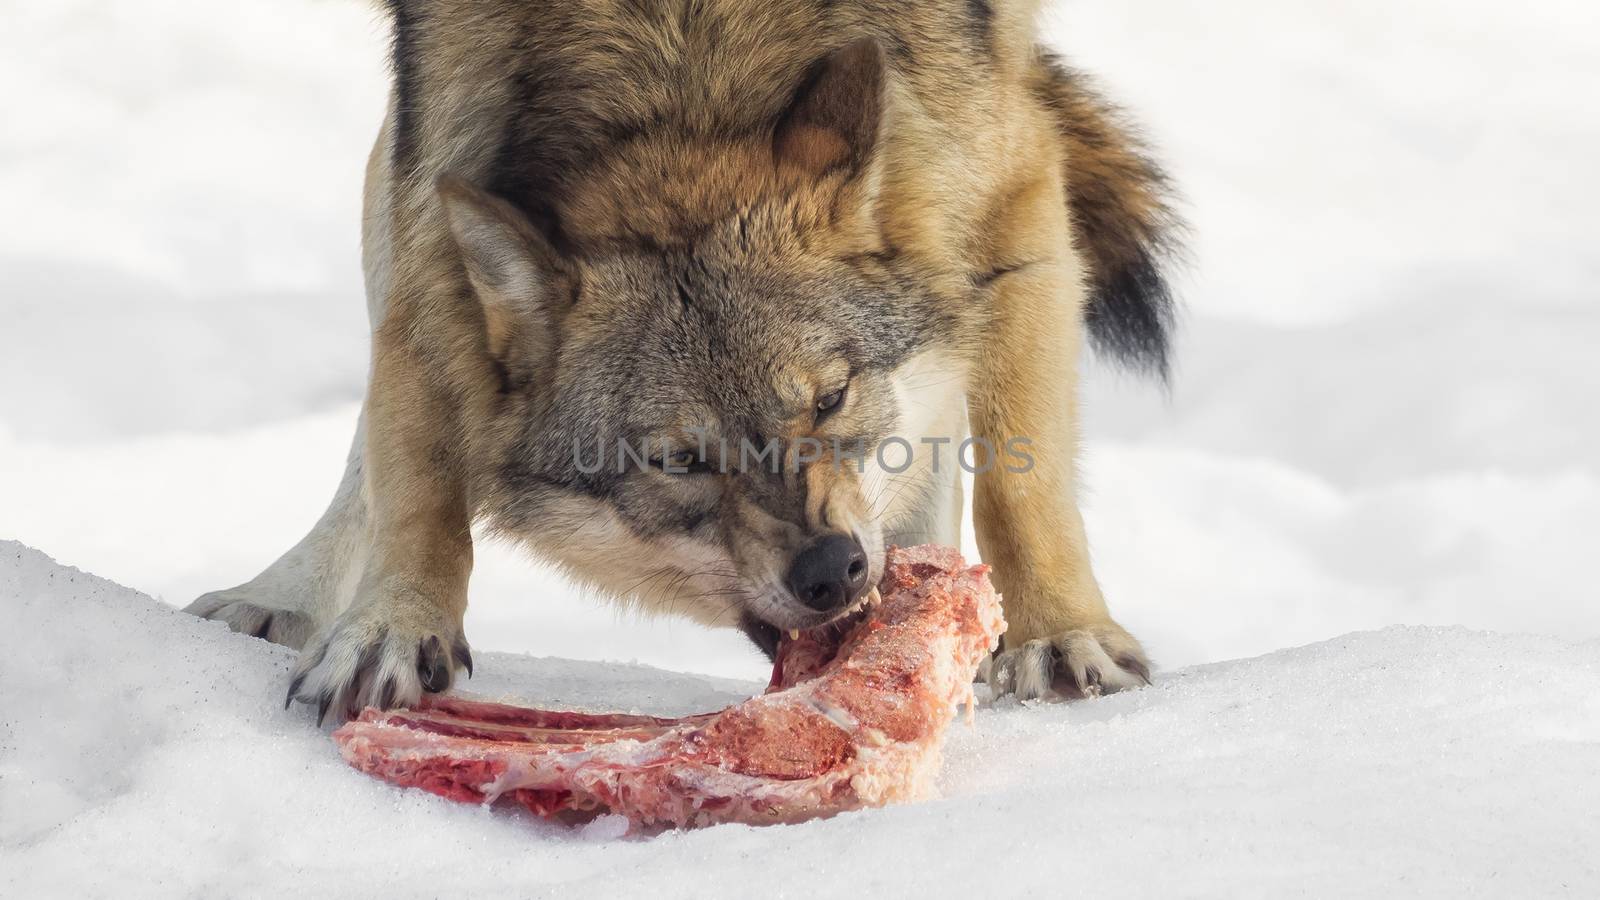 A wolf eats meat and looks directly into the camera